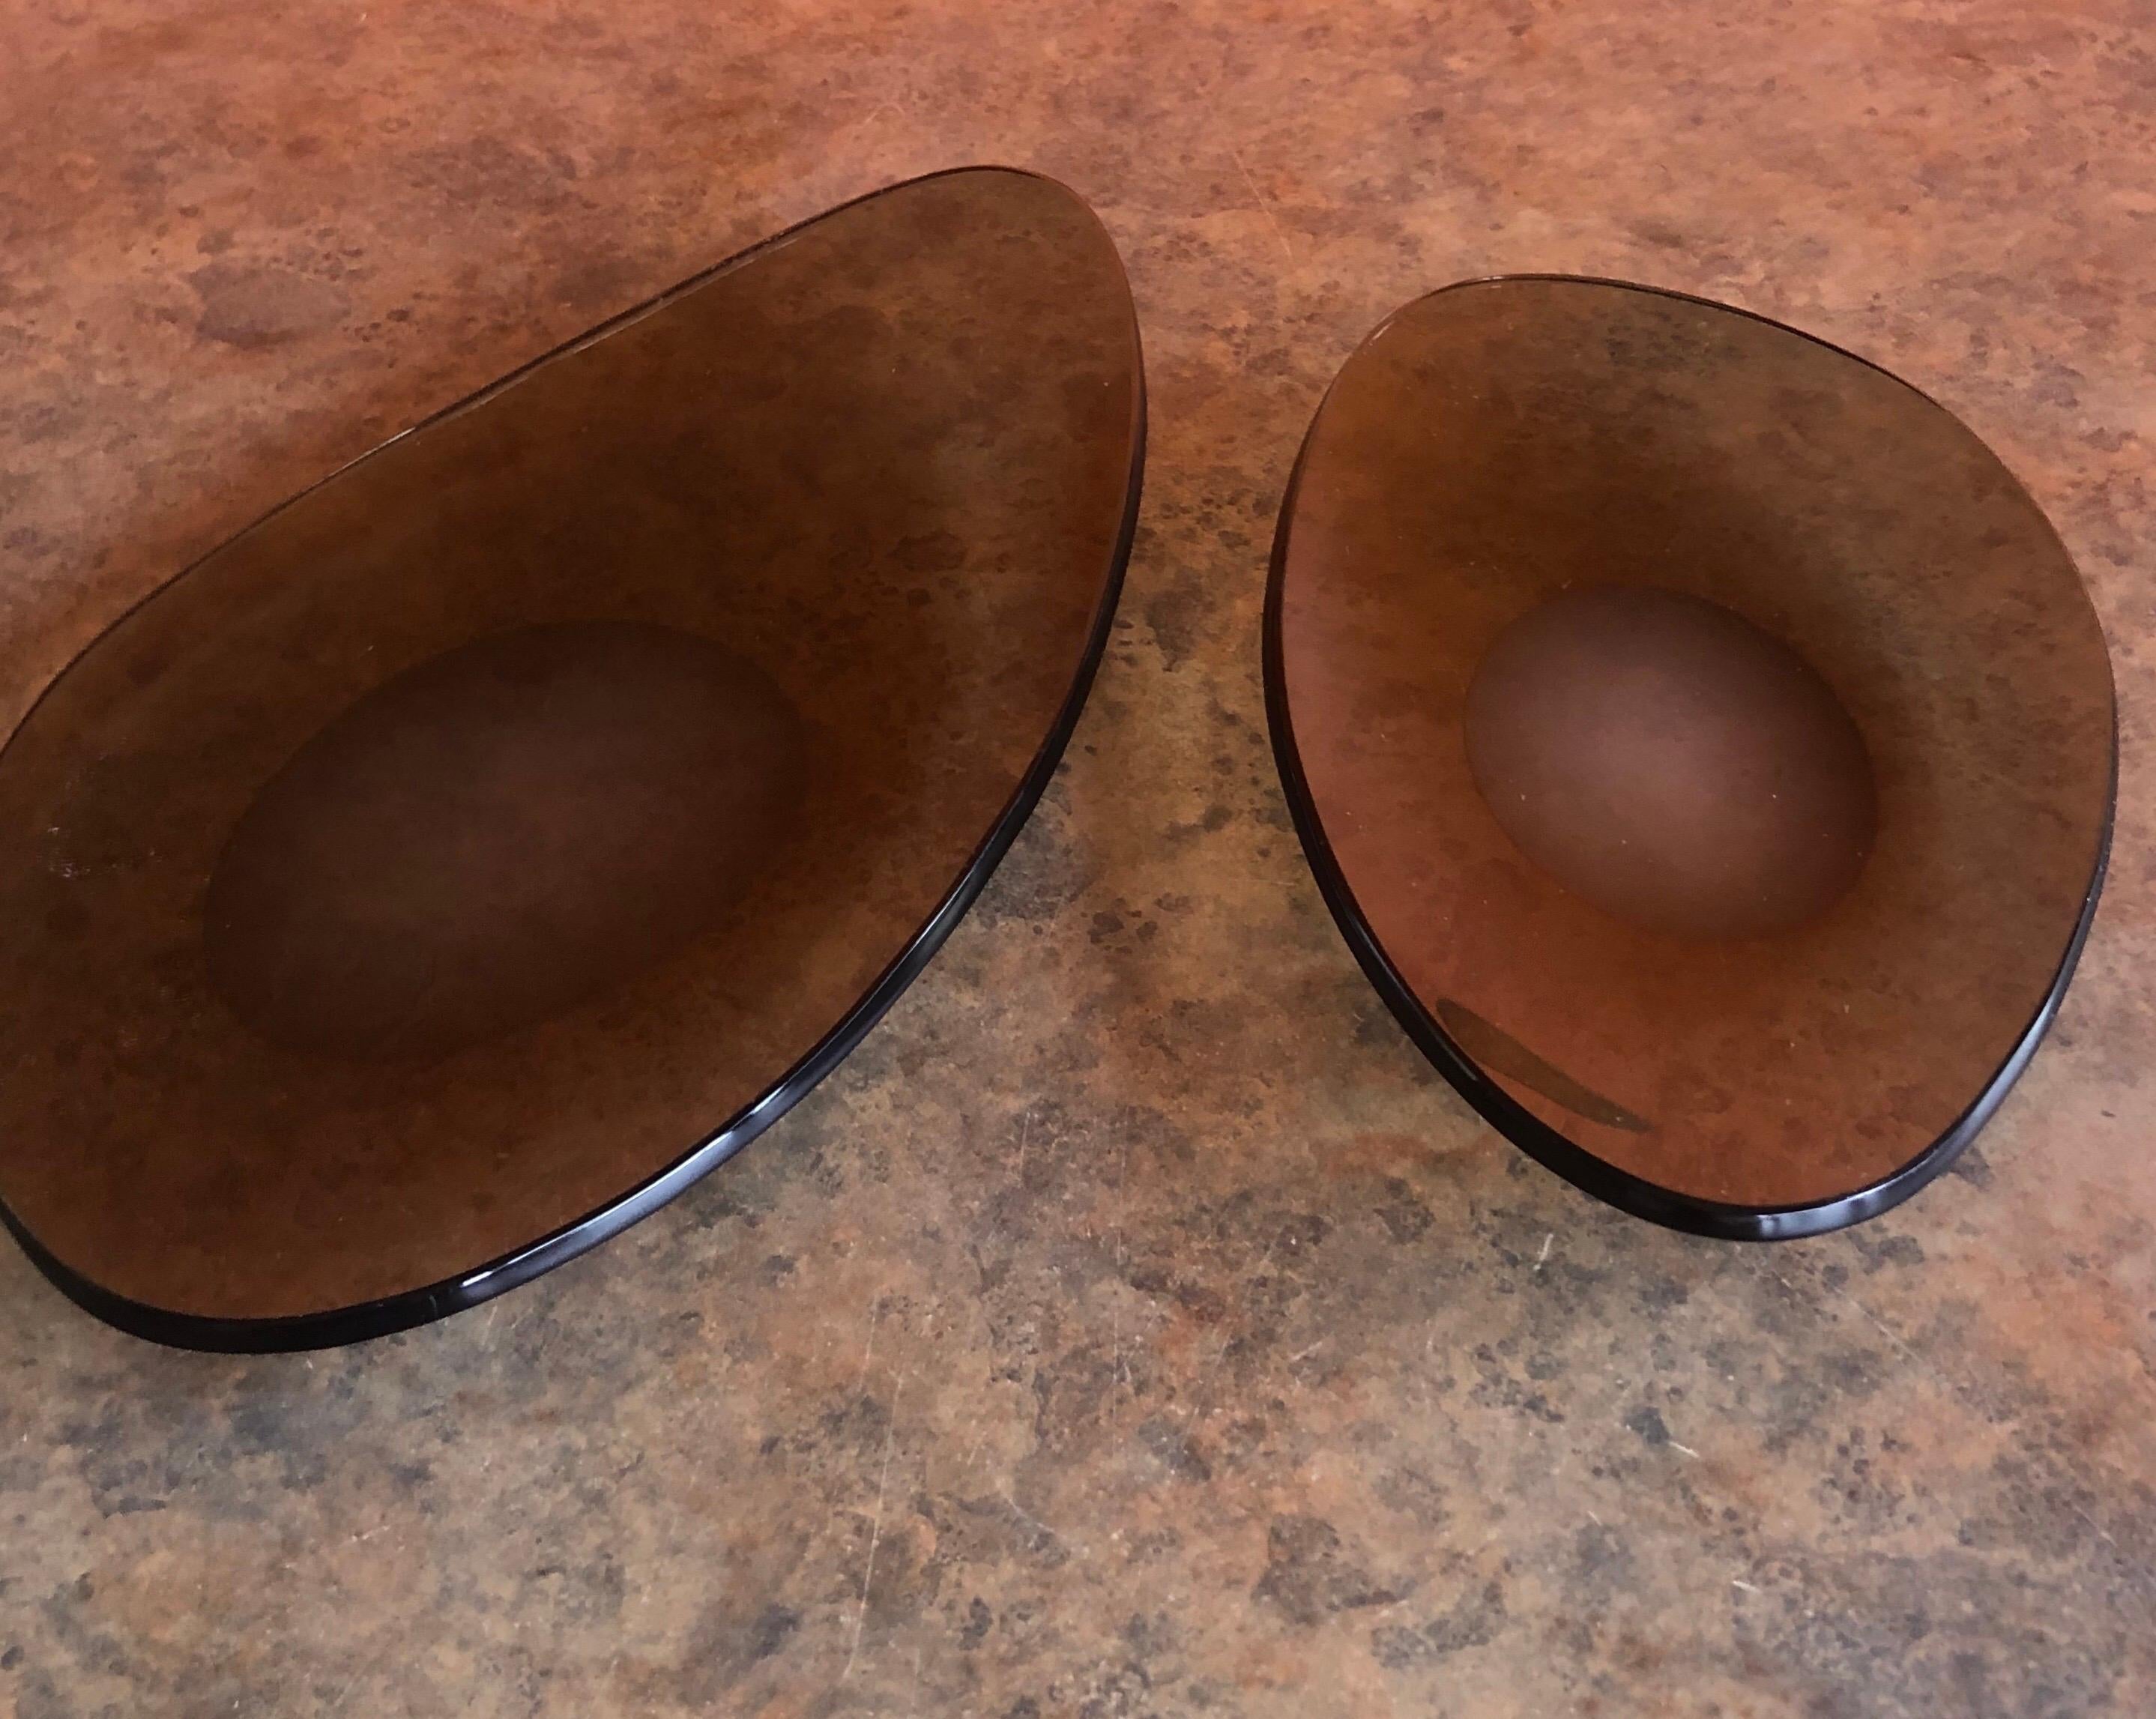 A very nice pair of shallow freeform sculptural smoke glass bowls, circa 1970s. The bowls are in very good vintage condition and measure as follows: Large 11.25 W x 6.5